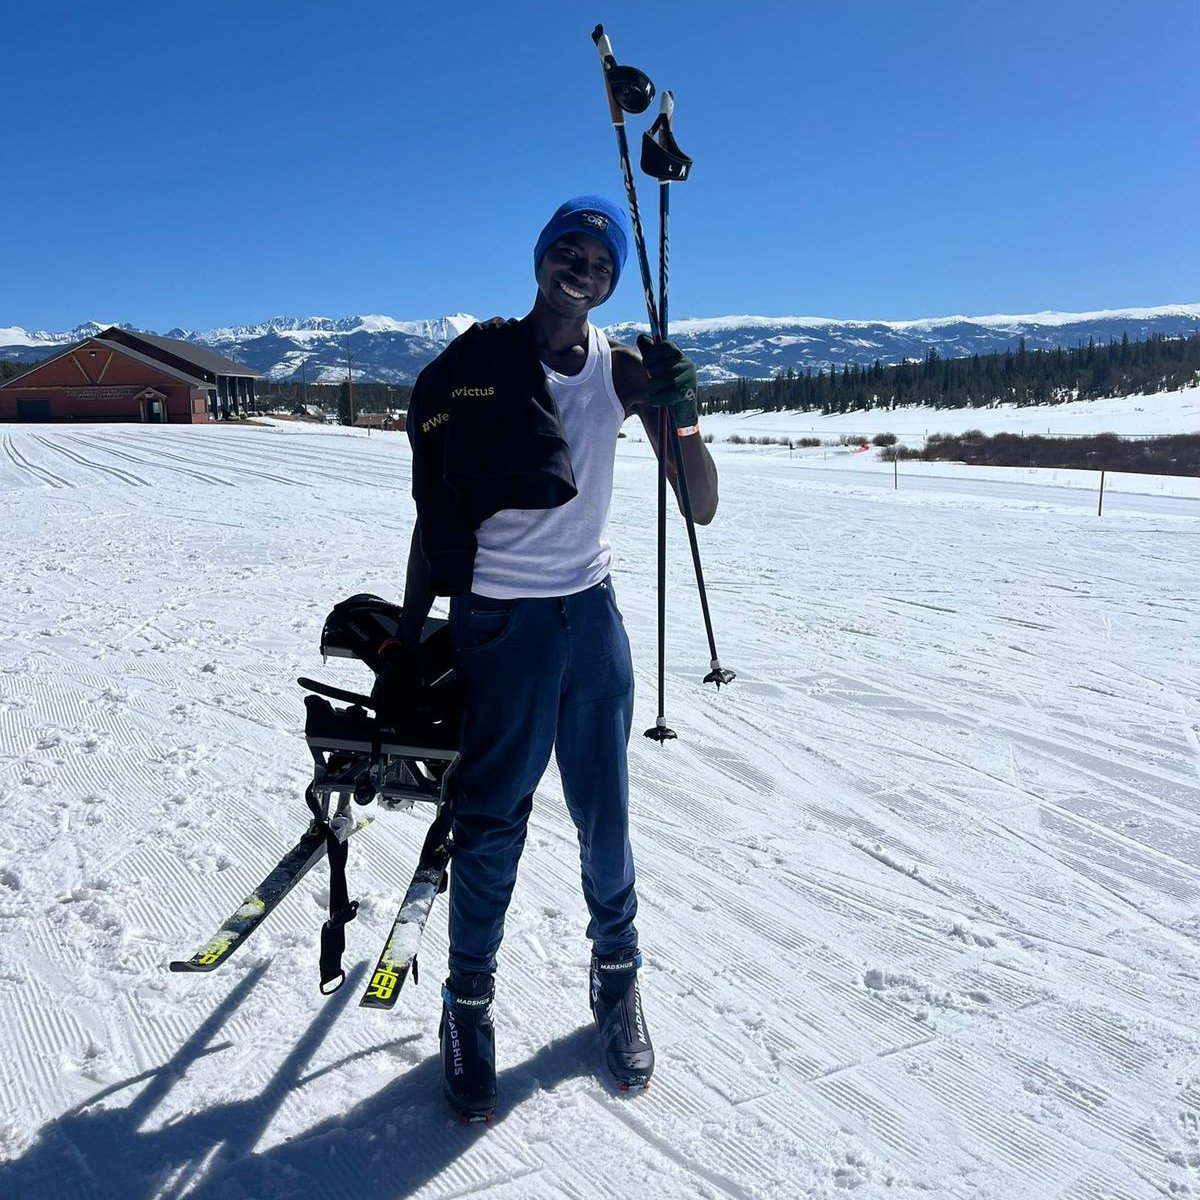 We're delighted to have Gaddafi Ya'u from Nigeria on our latest #InvictusAdventures to the AFPST Championships in Colorado. He's recovering and learning about a whole new world of winter adaptive sports. #InvictusSpirit 💛🖤